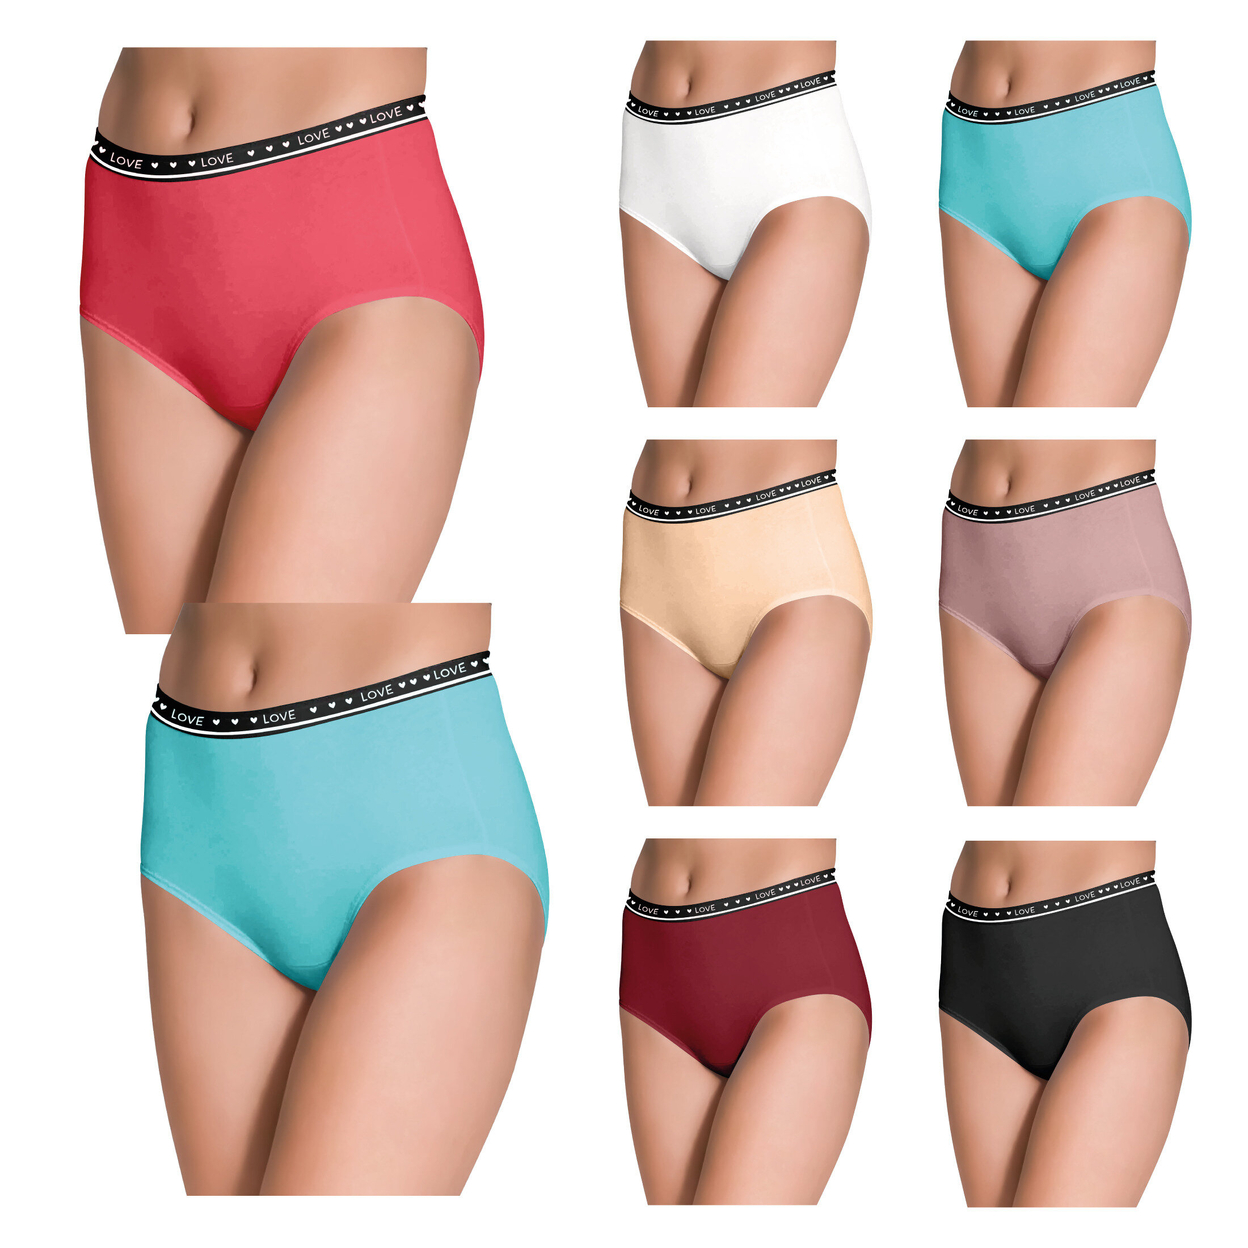 Multi-Pack: Women's Ultra Soft Moisture Wicking Panties Cotton Perfect Fit Underwear (Plus Sizes Available) - 6-Pack, Medium